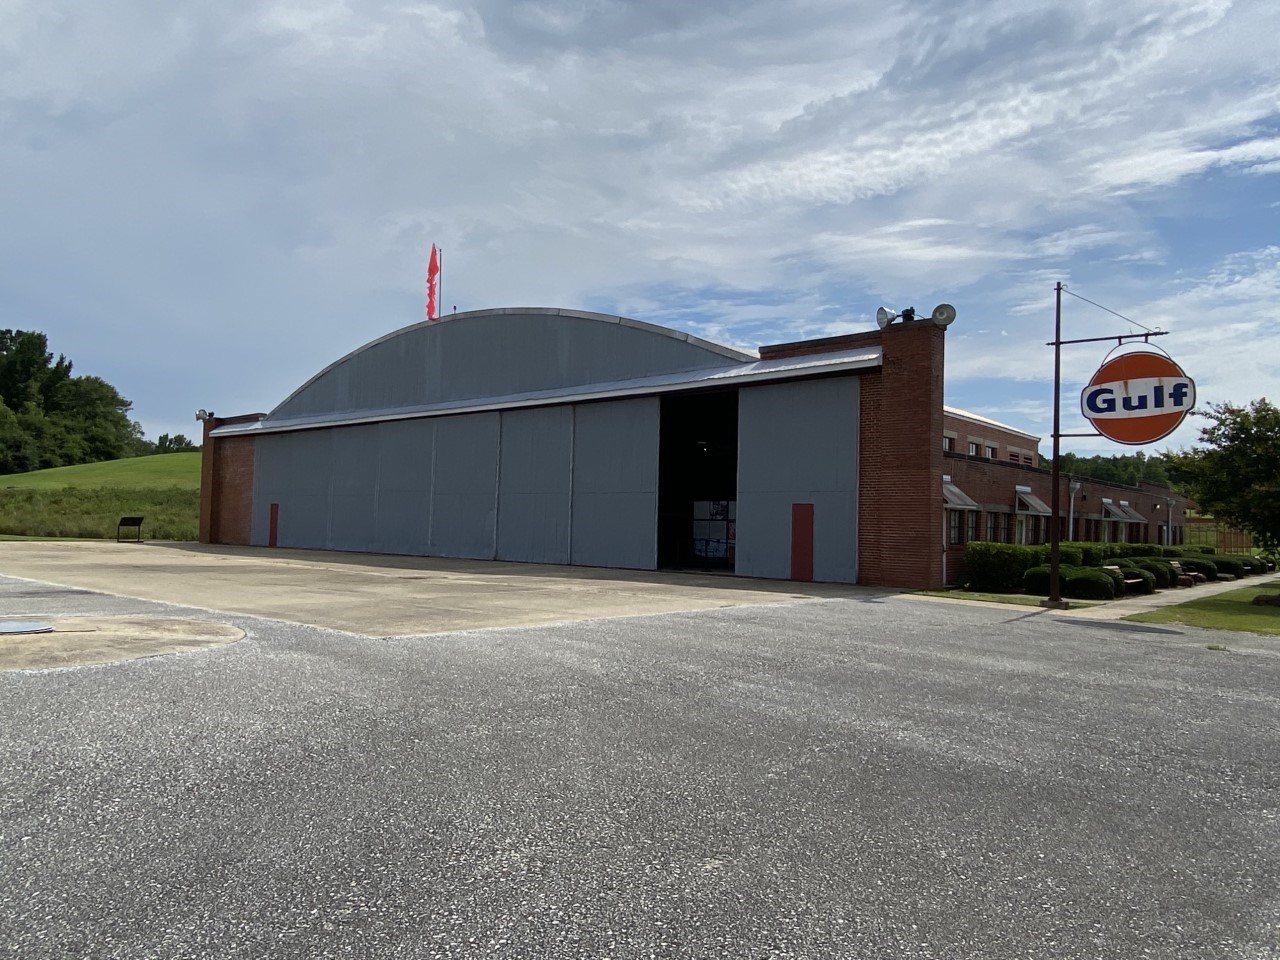 Shown here is an angled view of  Hangar No. 1 museum.